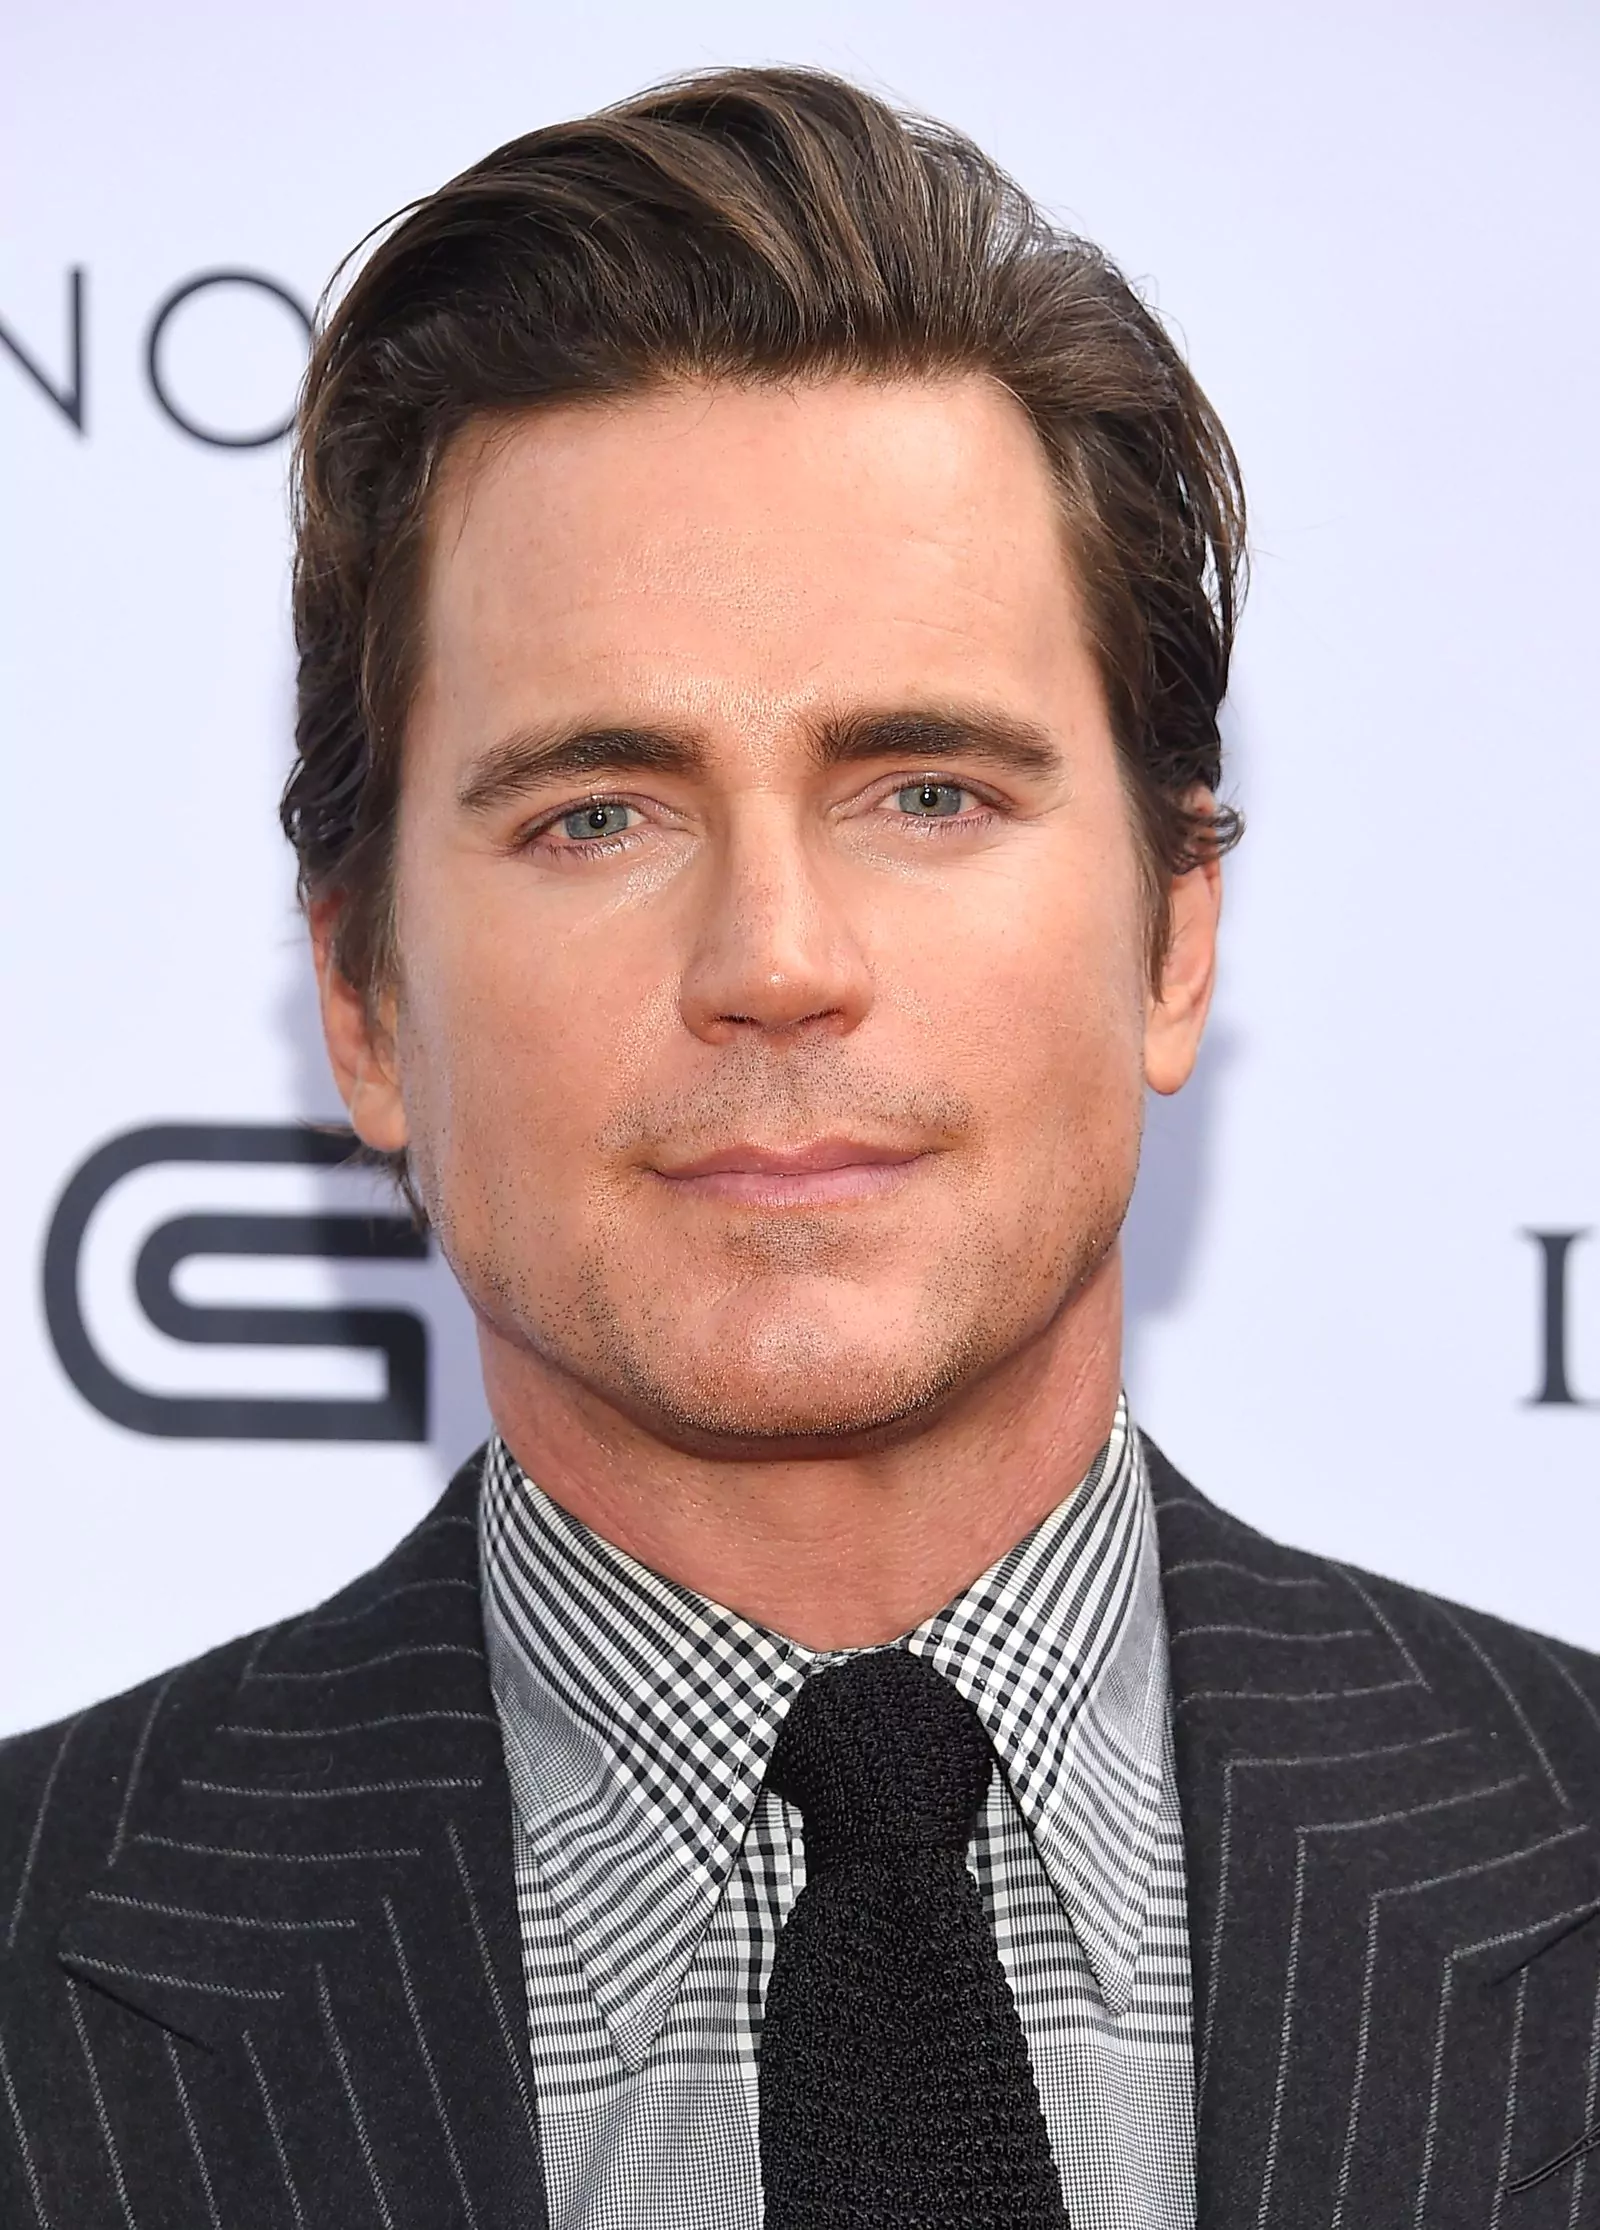 Matt Bomer attends The Daily's Fashion LA Awards 2023 in Beverly Hills on April 23, 2023.